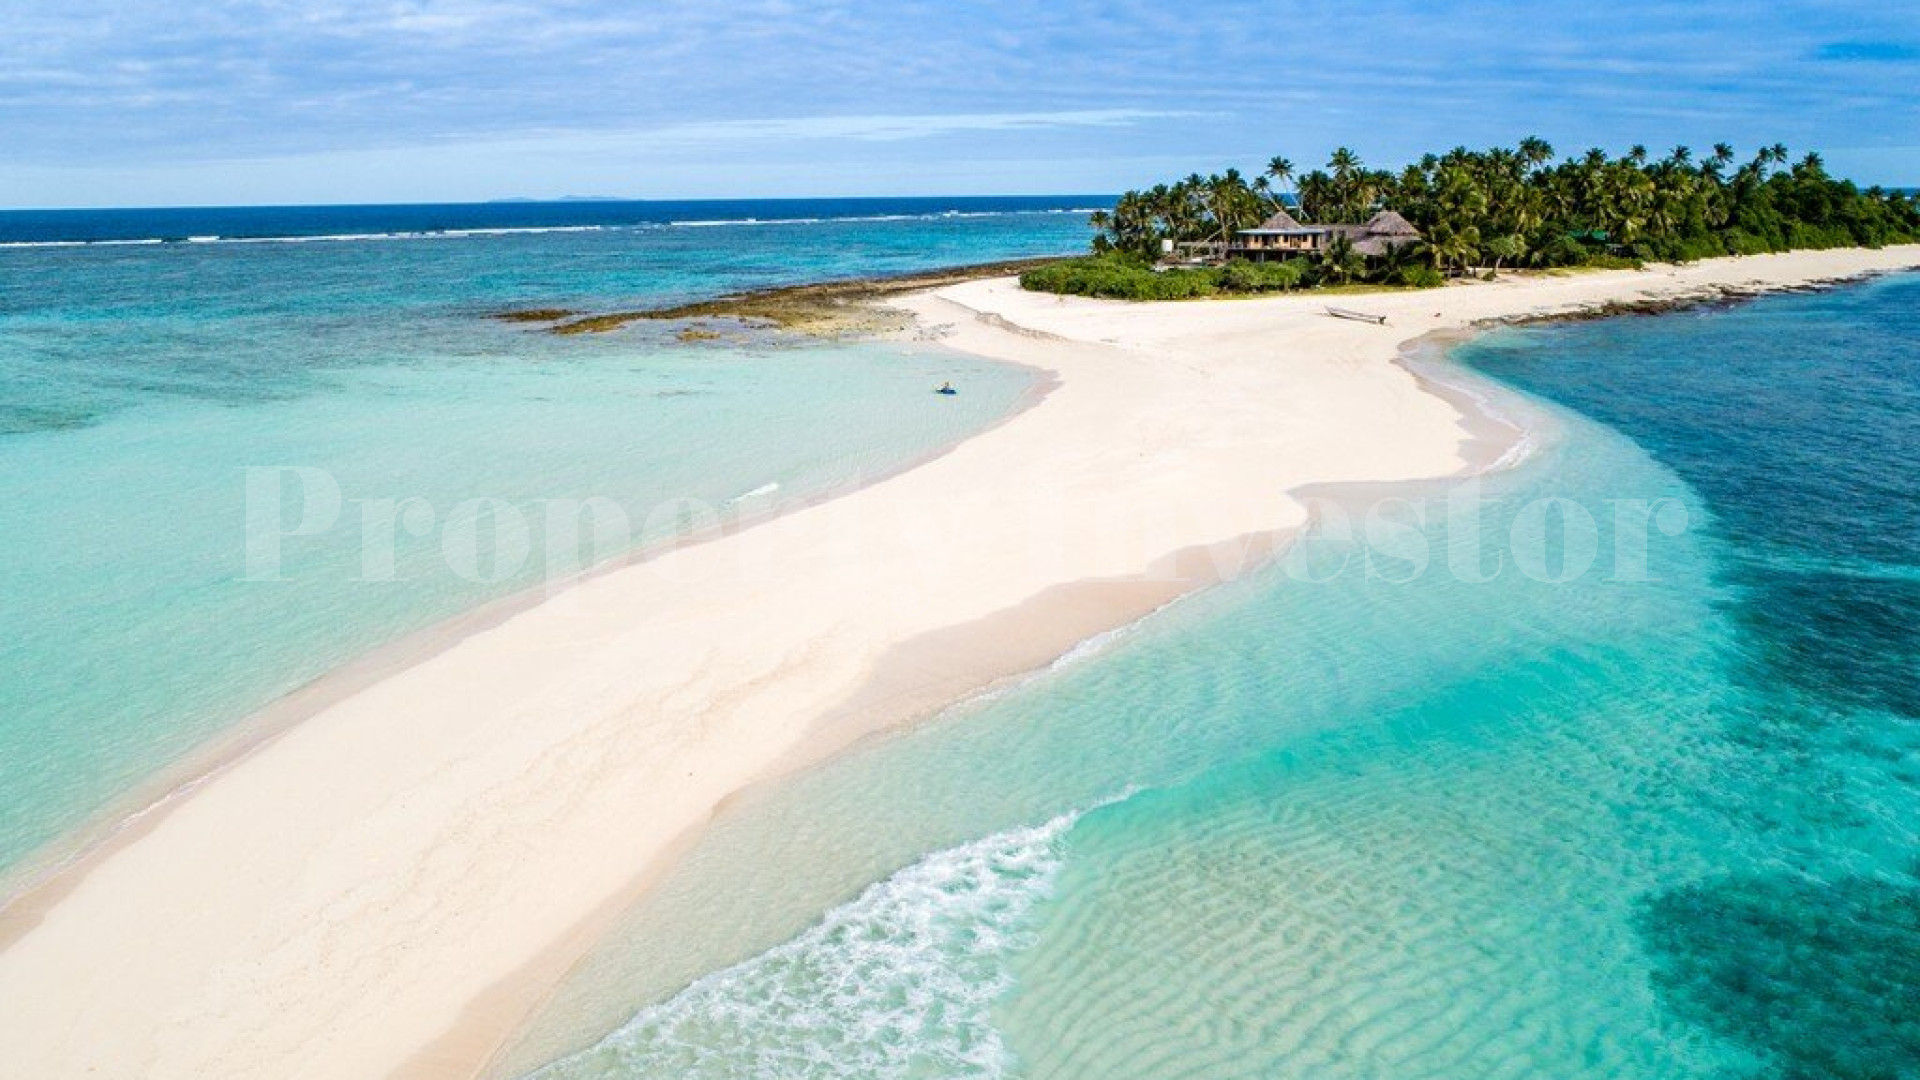 Picturesque 4.8 Hectare Private Island Residence for Sale in Fiji